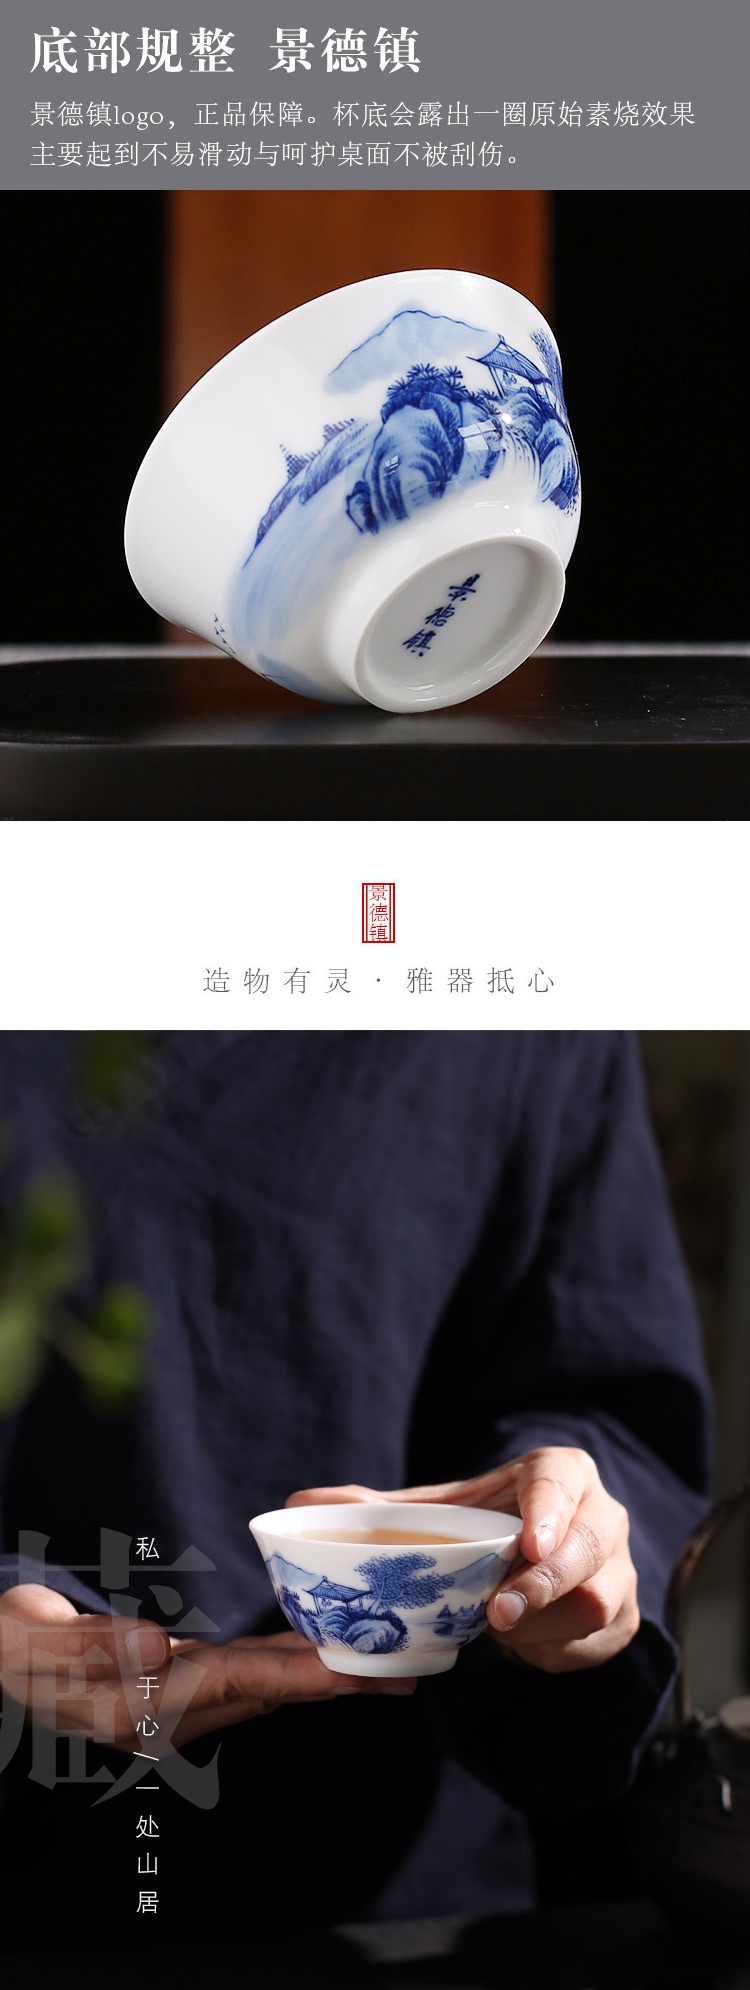 The Poly real jingdezhen hand - made kung fu tea cups of blue and white porcelain ceramic landscape scene home master cup a cup of tea